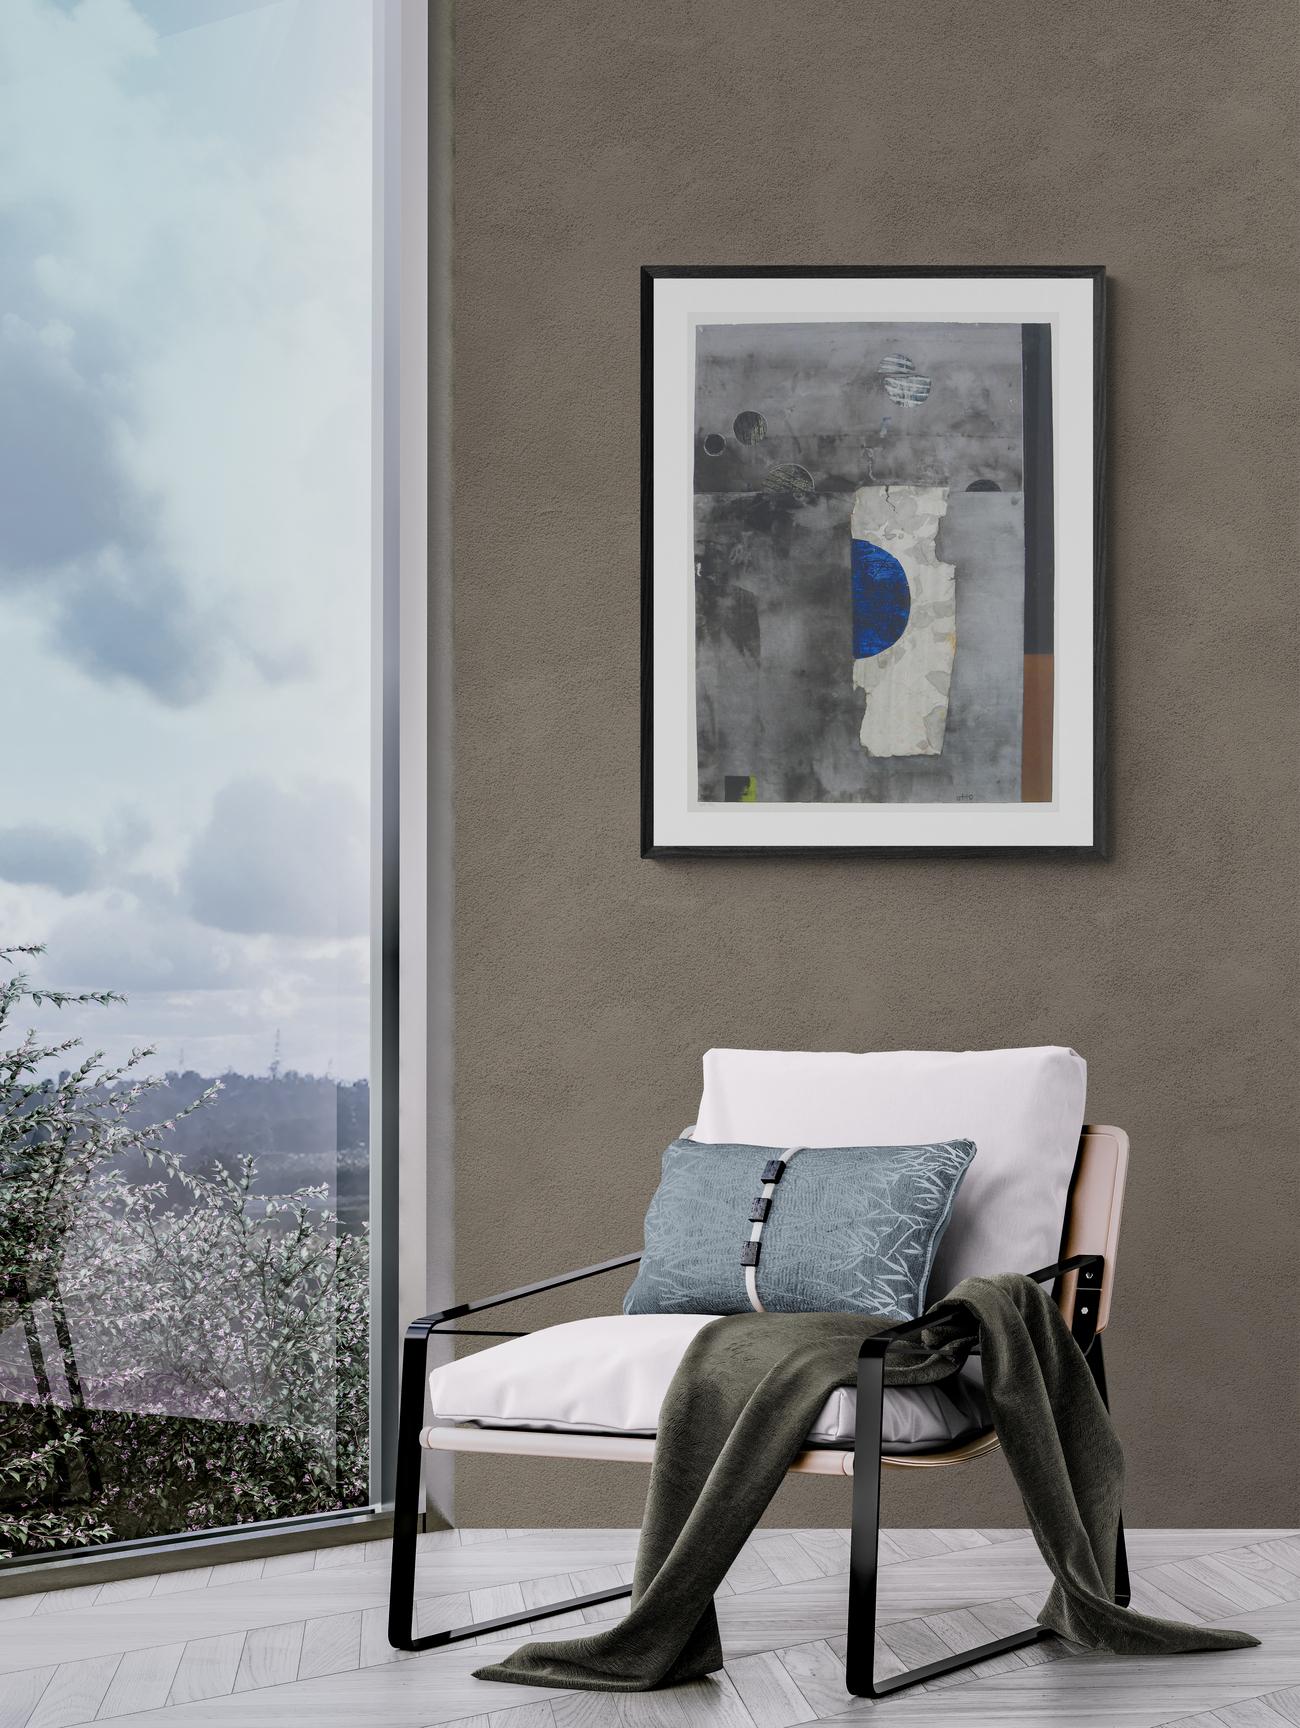 A darkening sky is illuminated by the eclipsed view of a bold deep blue moon in this contemplative piece by Otto Rogers. He was seen as a ‘big attack painter’ by the renowned art critic Clement Greenberg. As one of Canada’s preeminent modernist